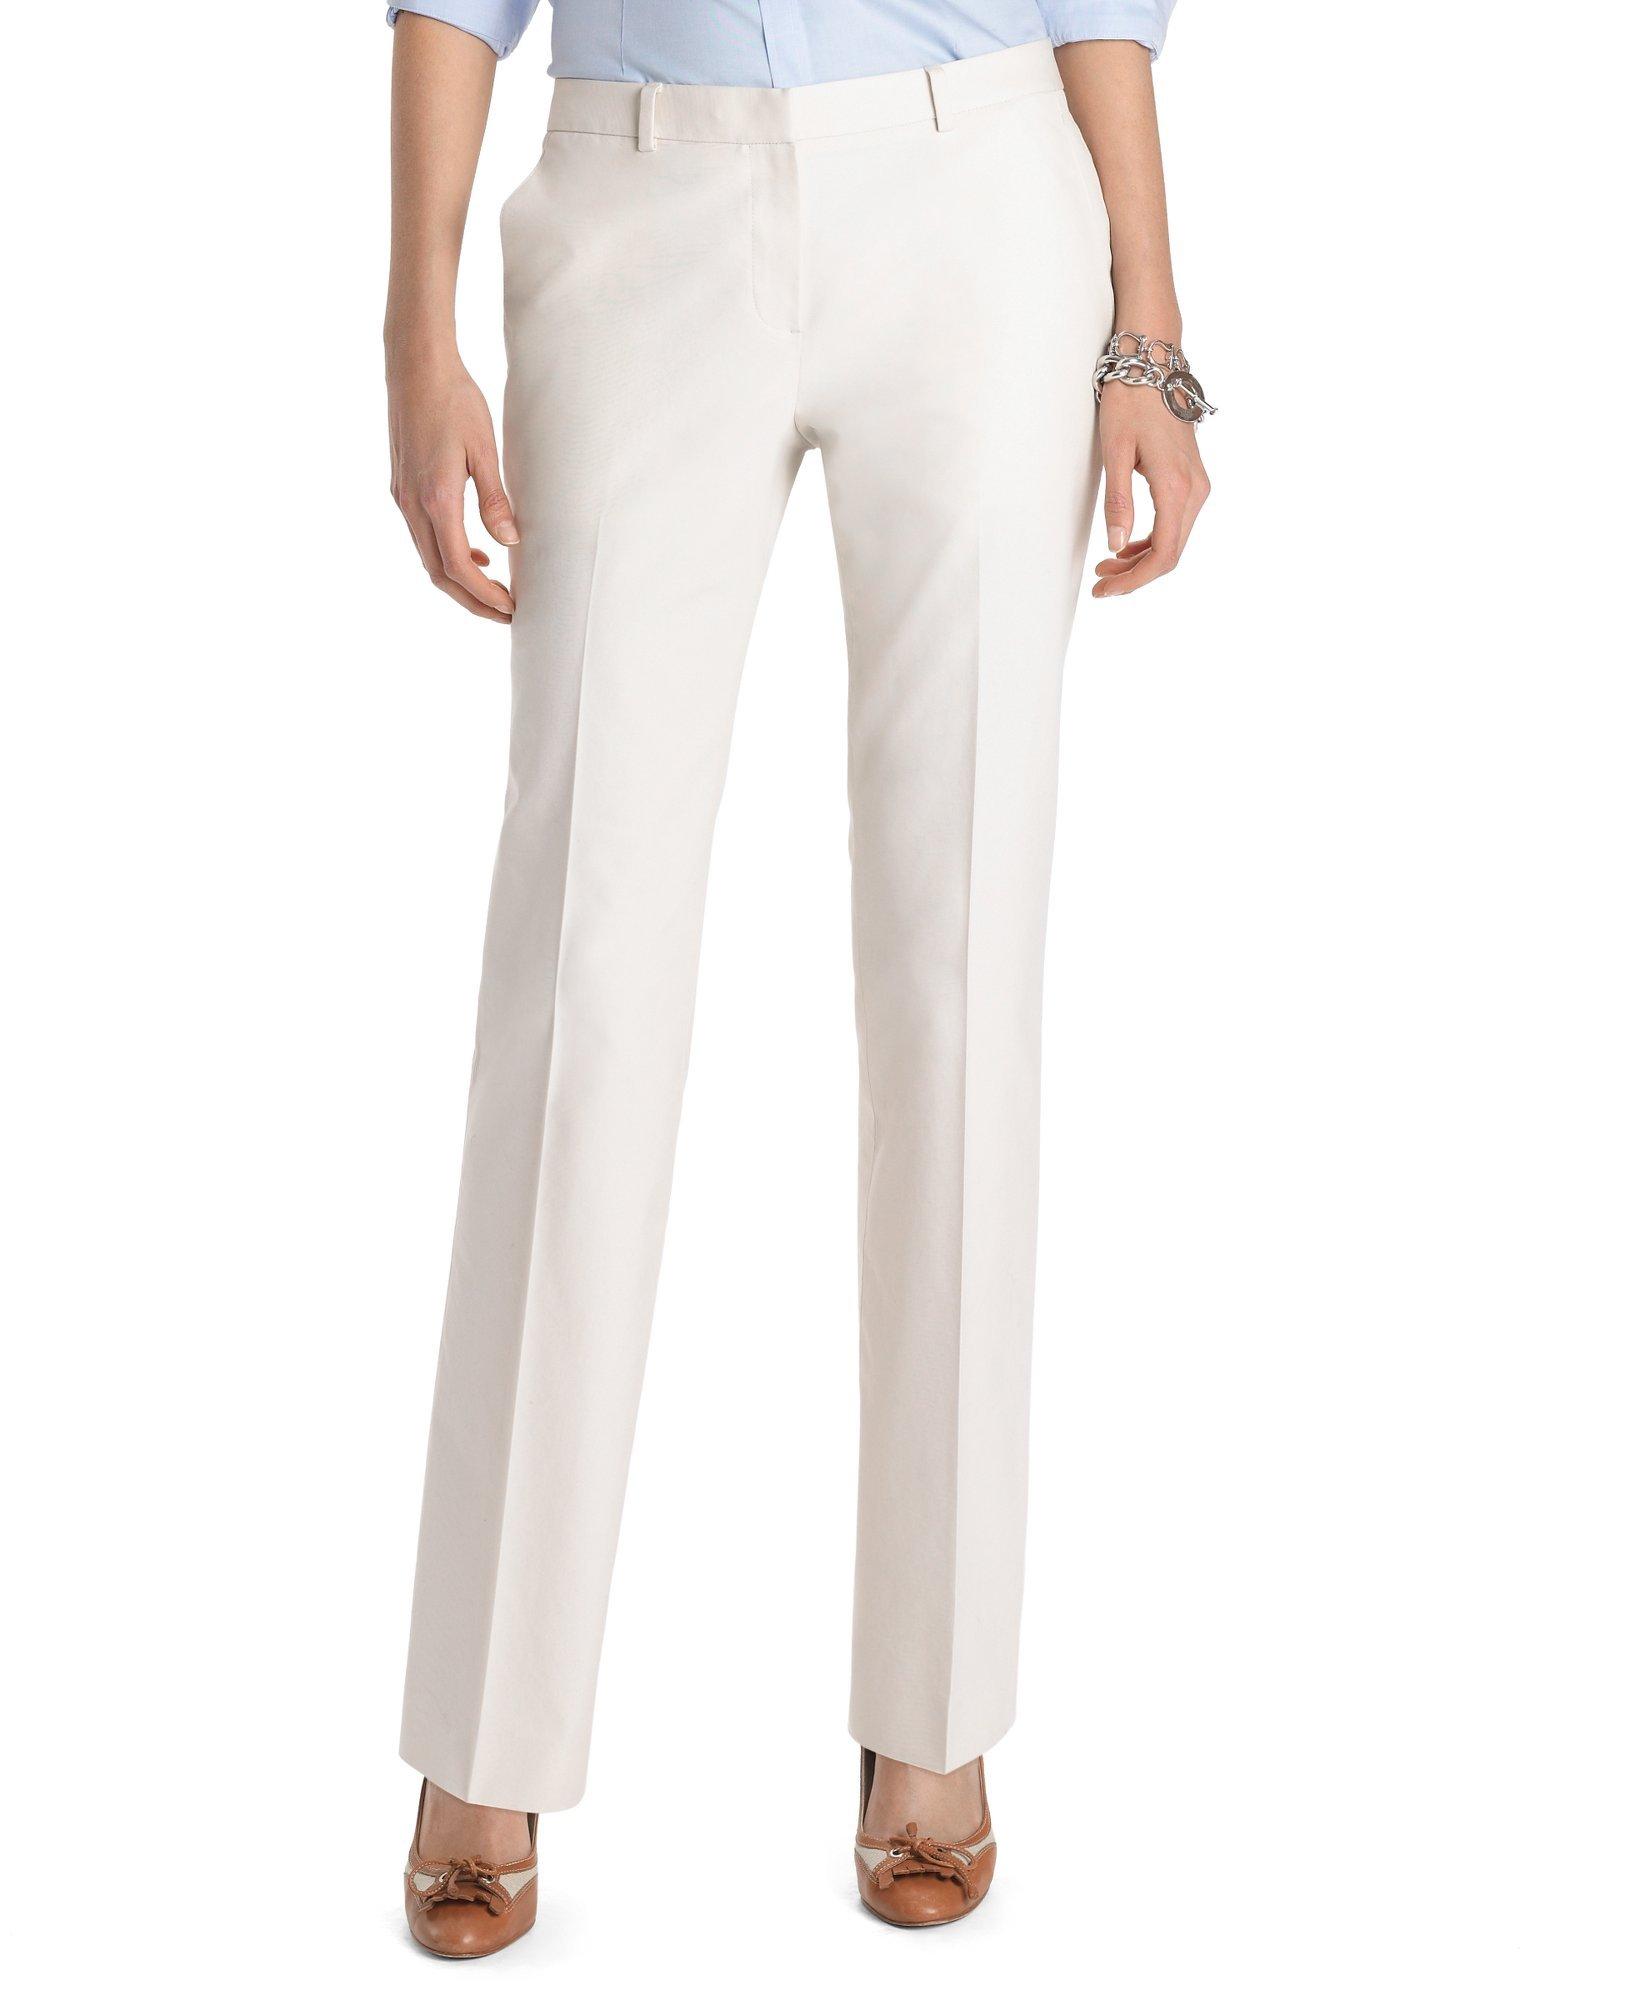 Women's Plain-Front Non-Iron Chinos | Brooks Brothers